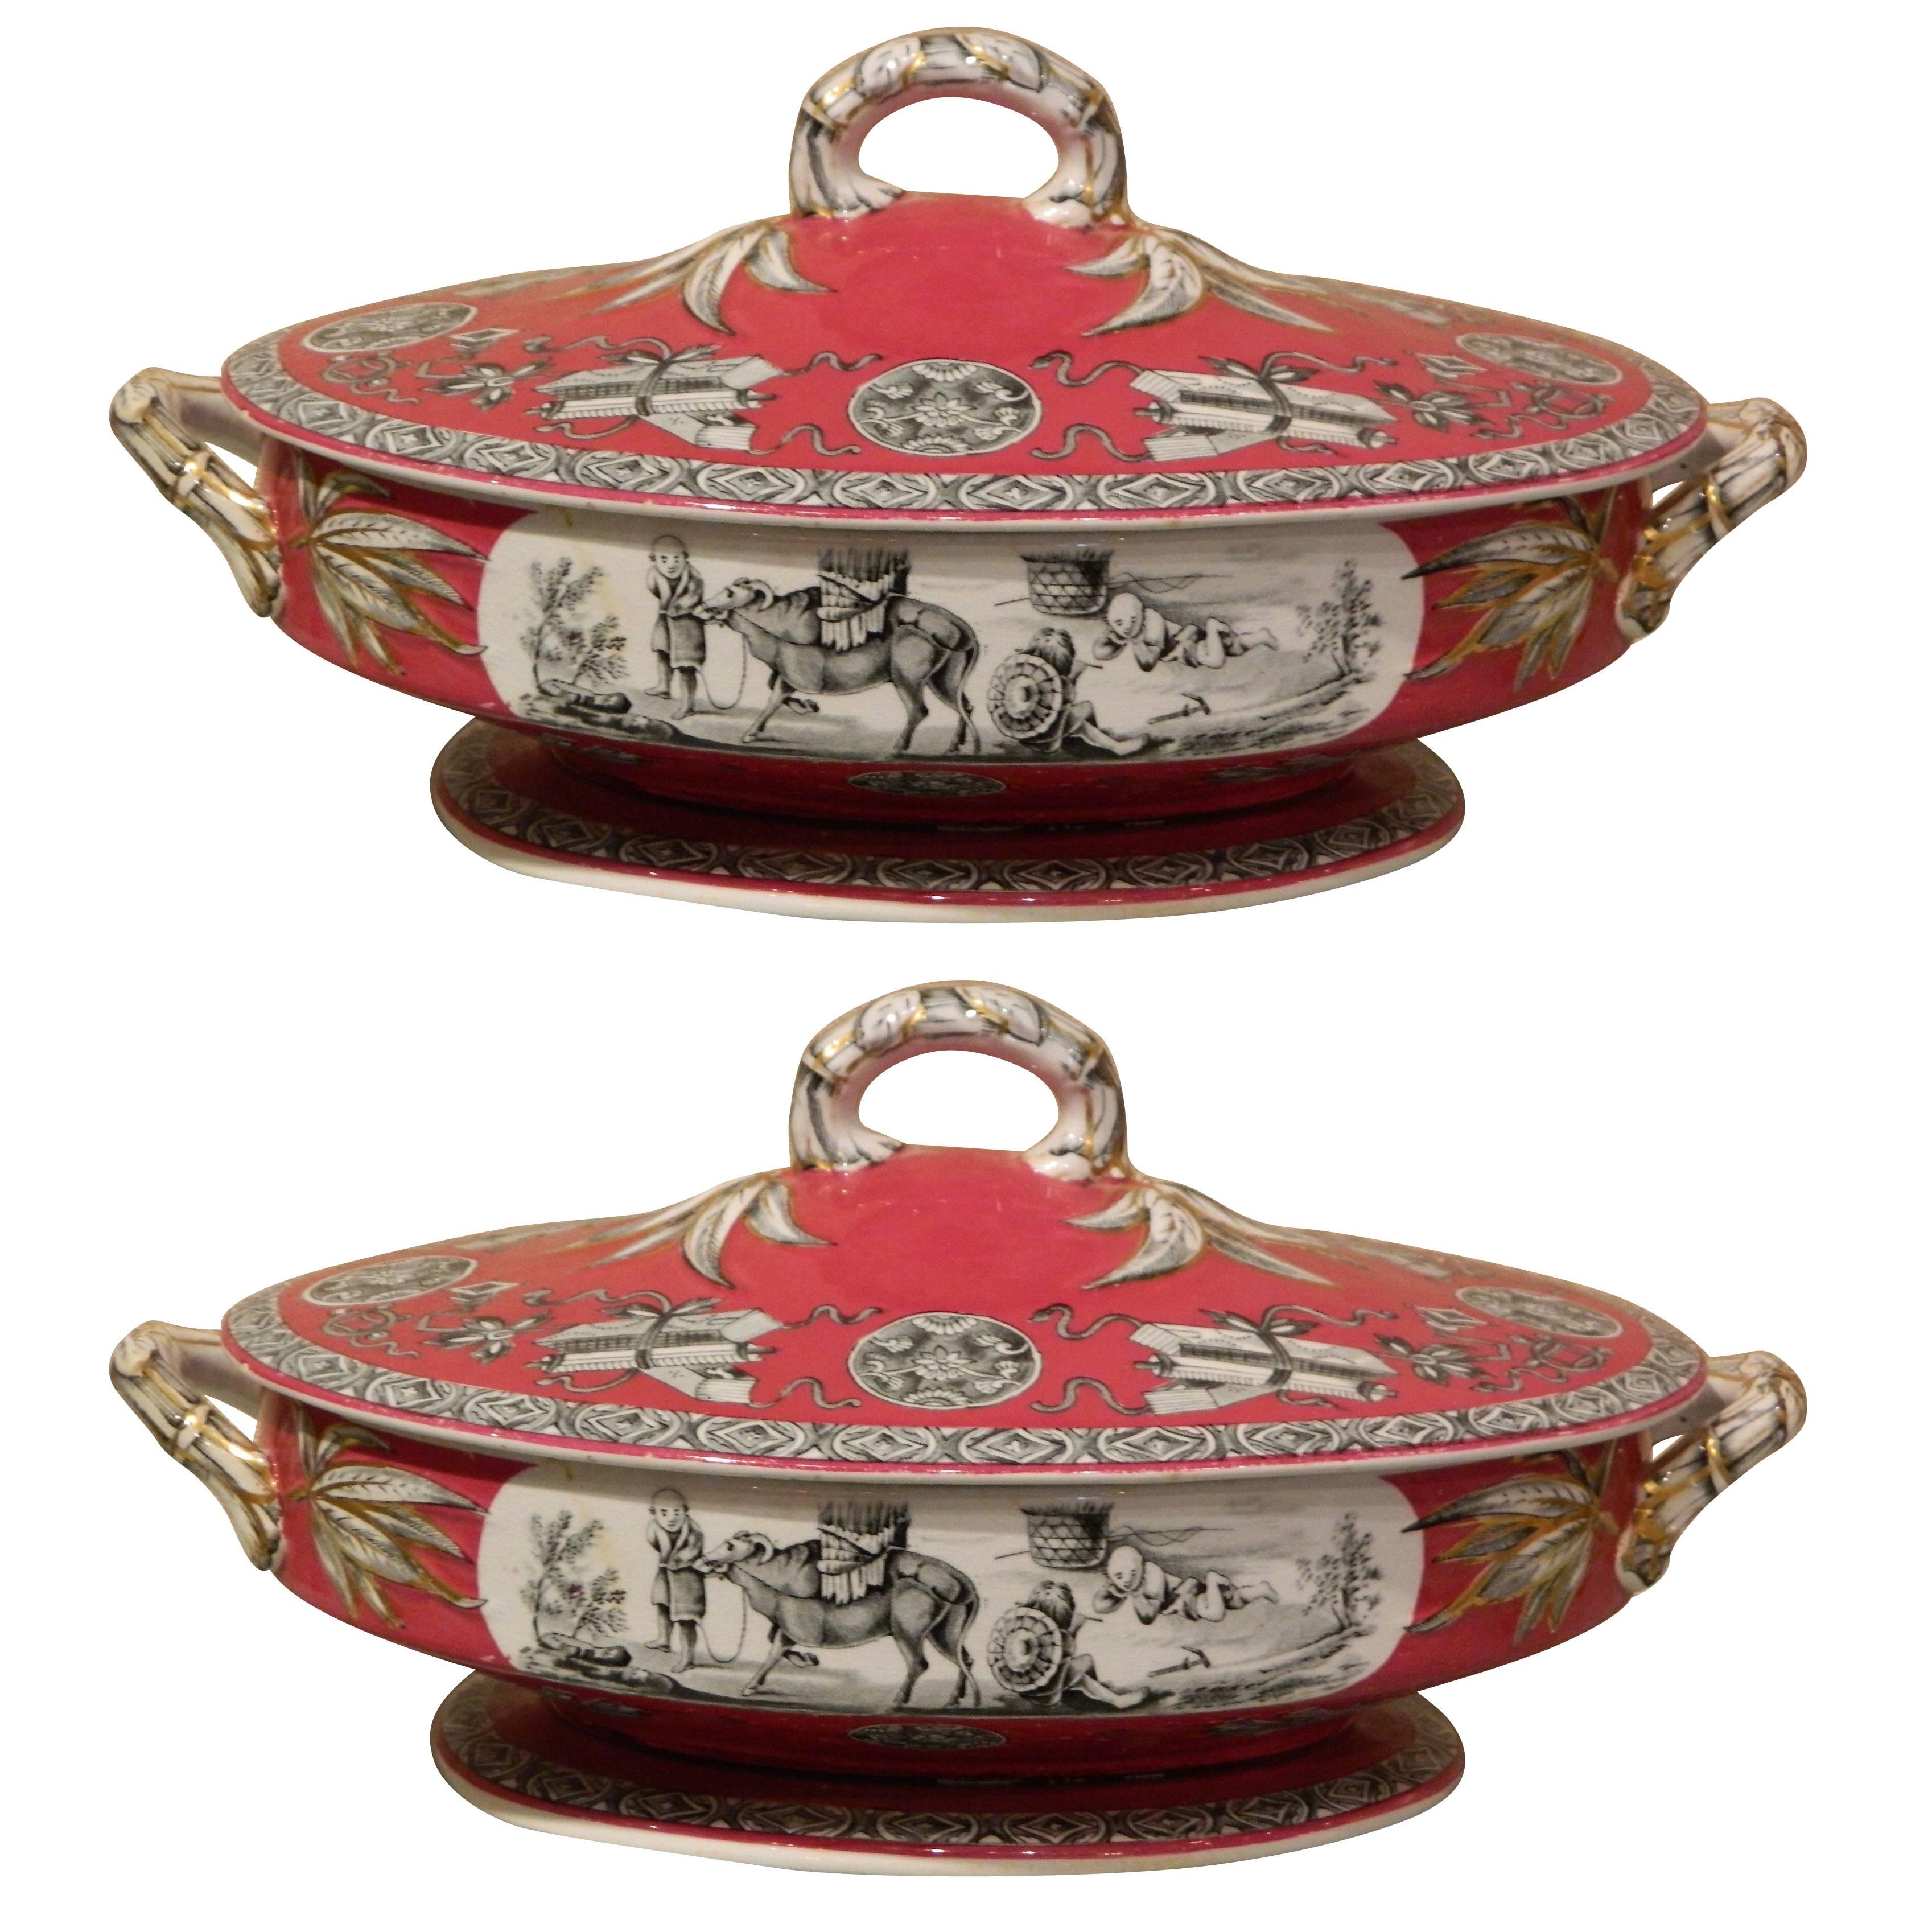 Royal Staffordshire, Yedo Pair of Serving Dishes with Lids, 20th Century